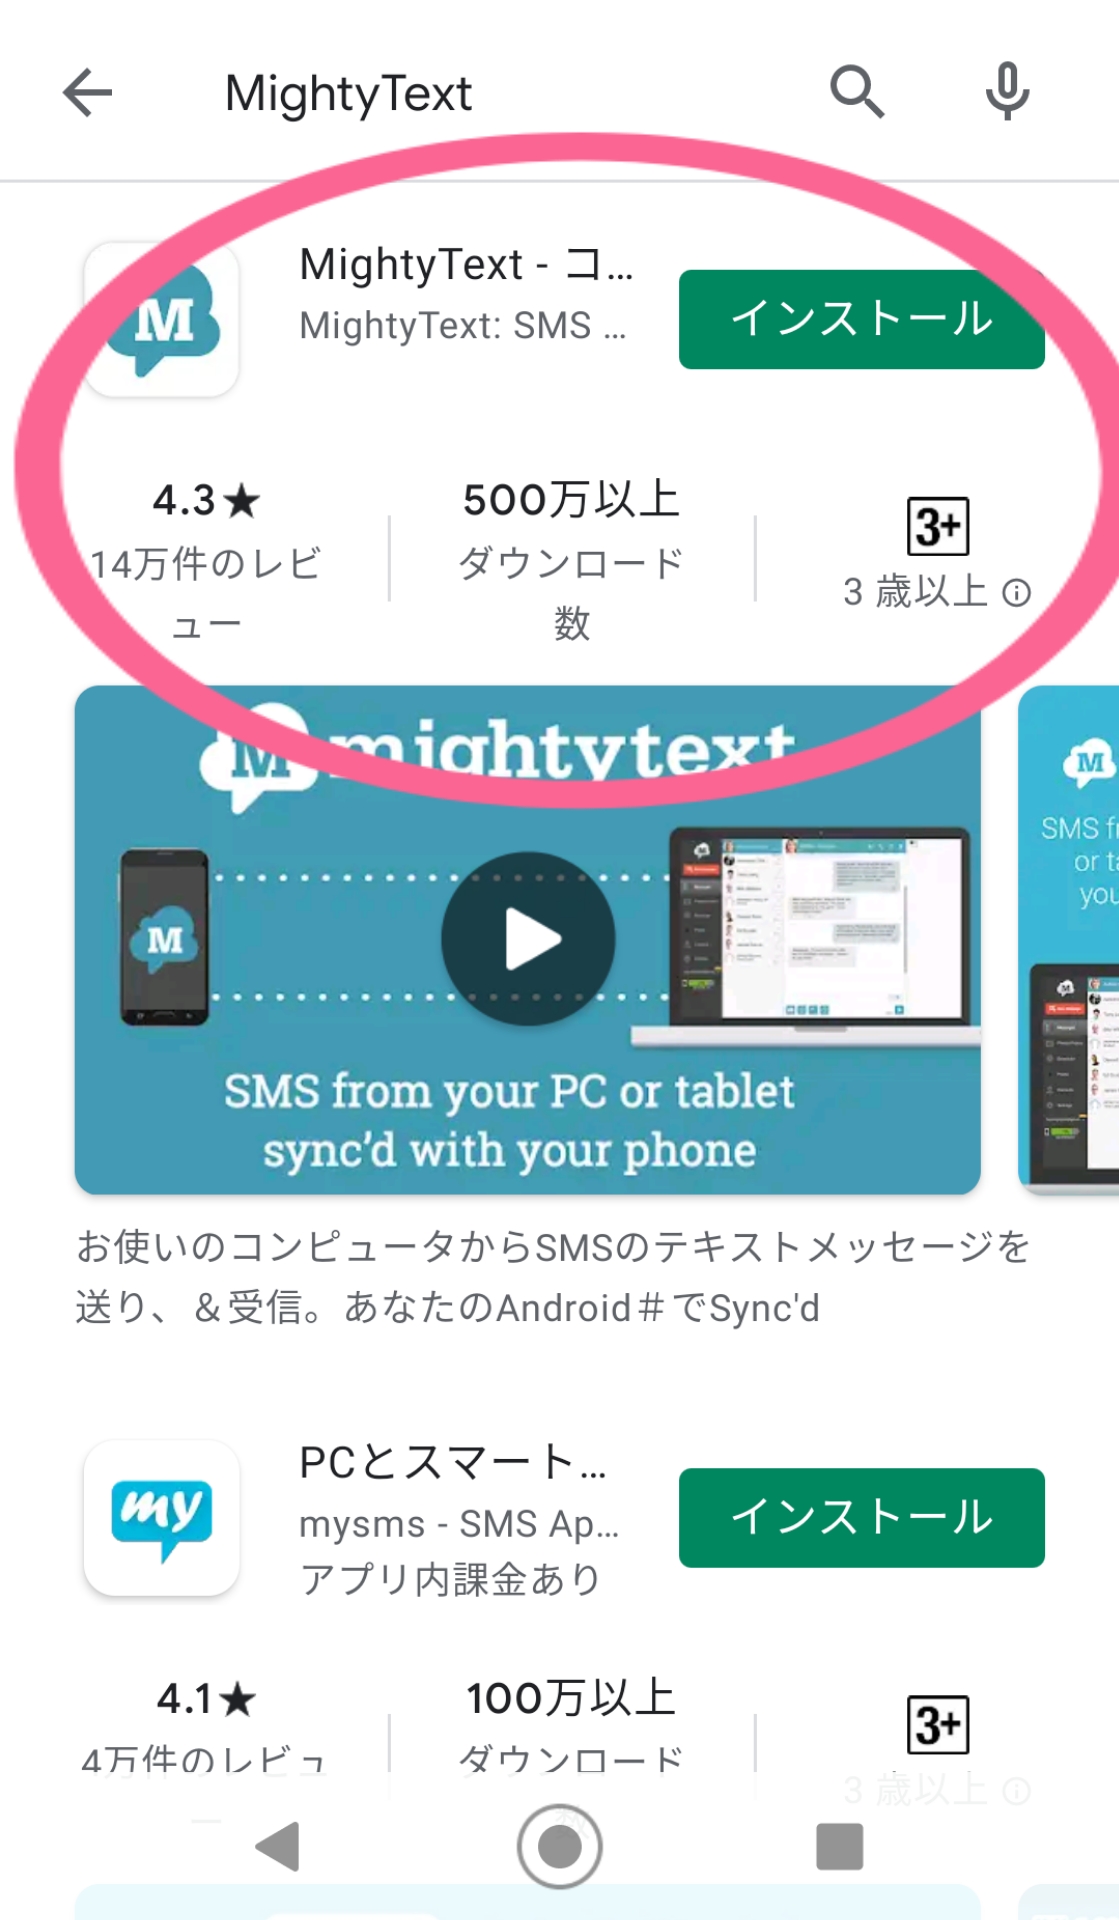 mightytext for gmail